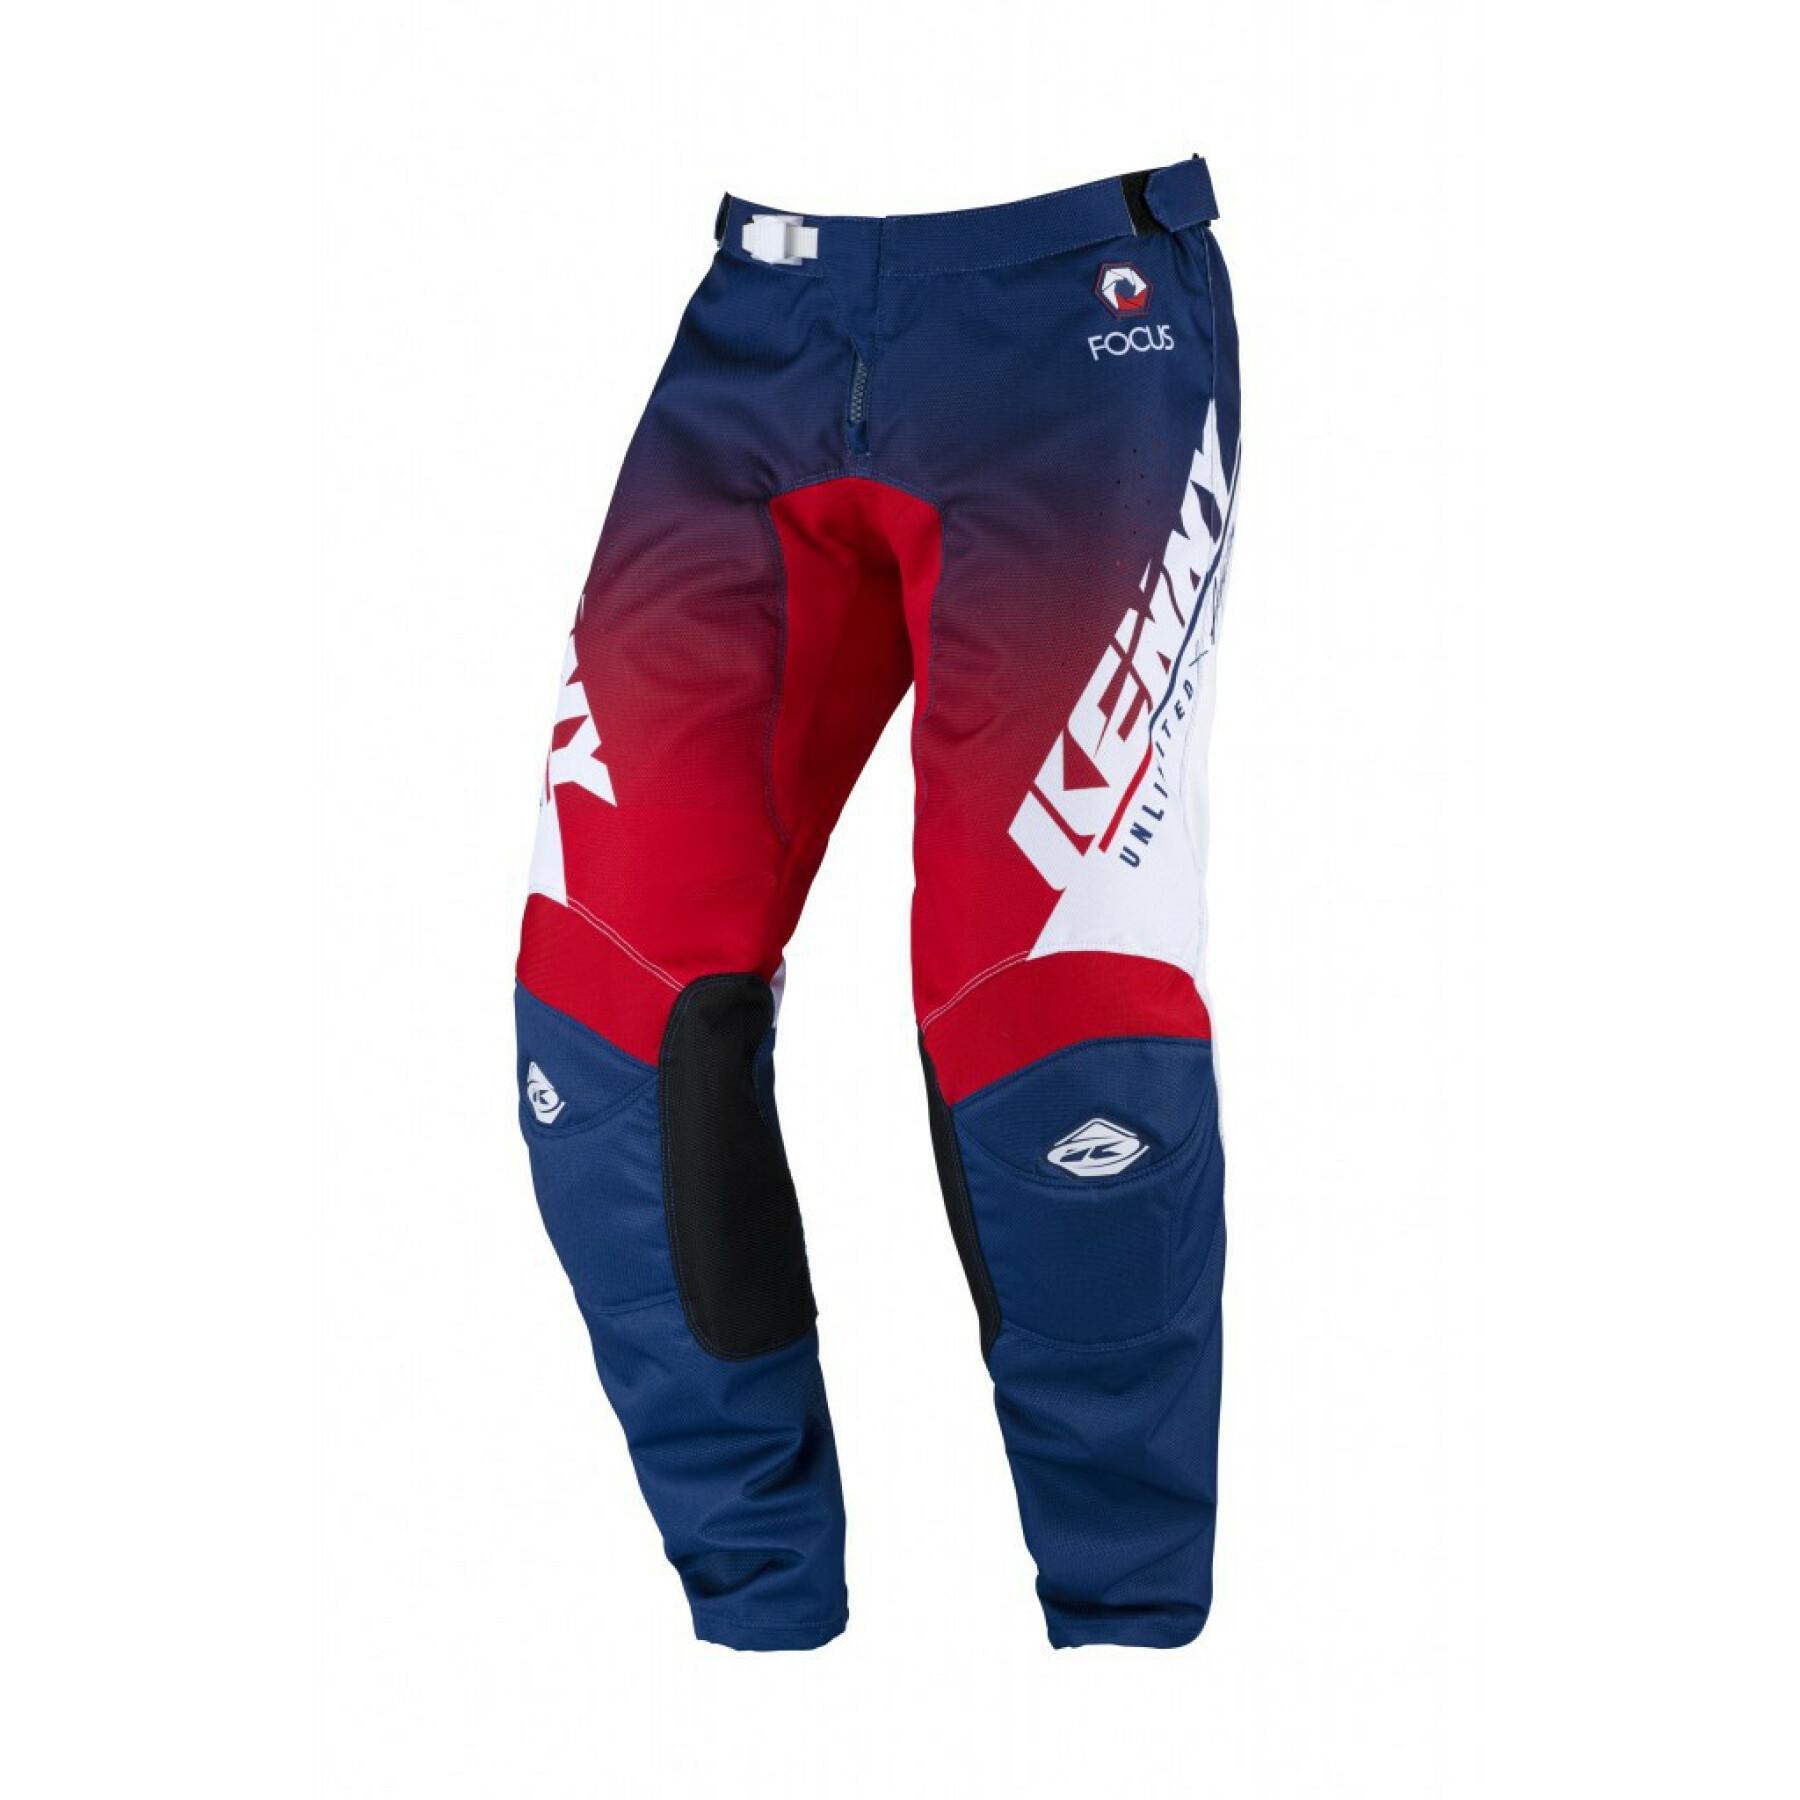 Child motorcycle pants Kenny track focus